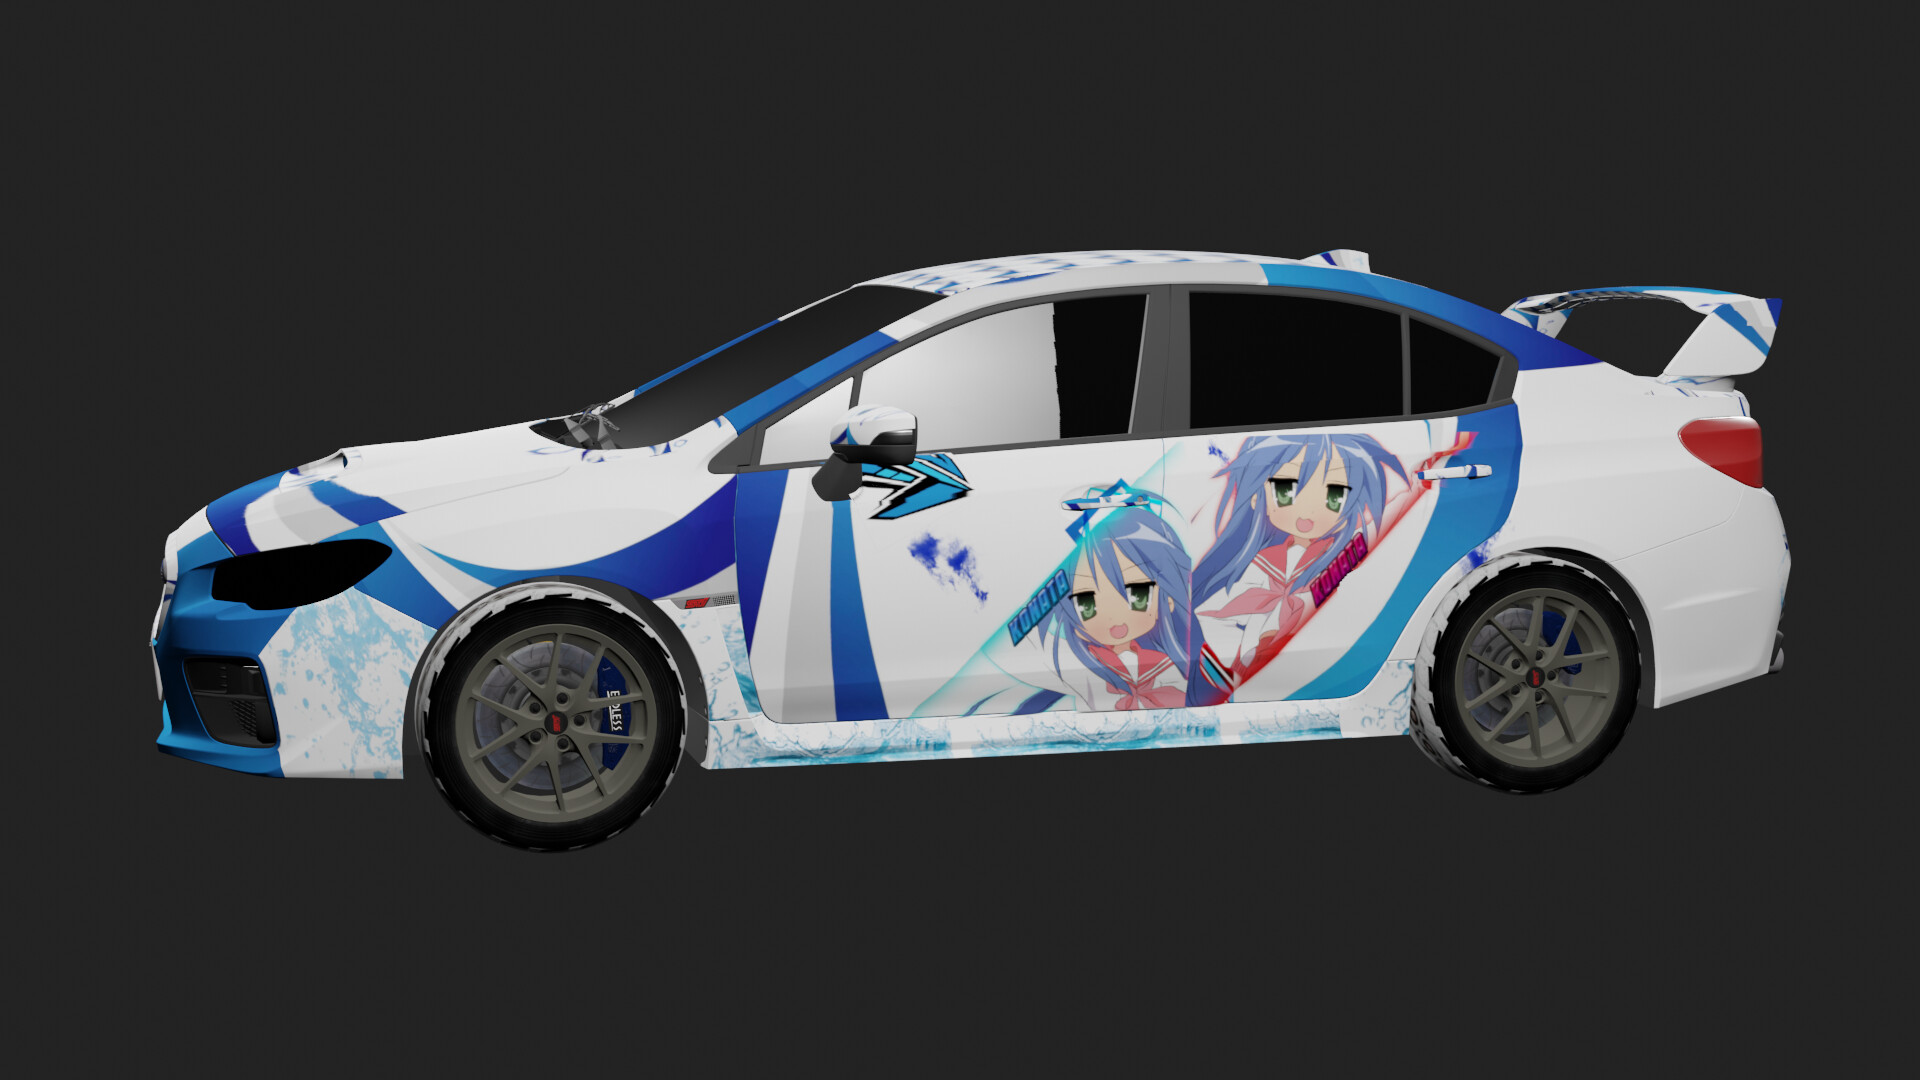 ArtStation - I make this 3D Car With Itasha Anime Texture for my Client 😊  Software: Blender 